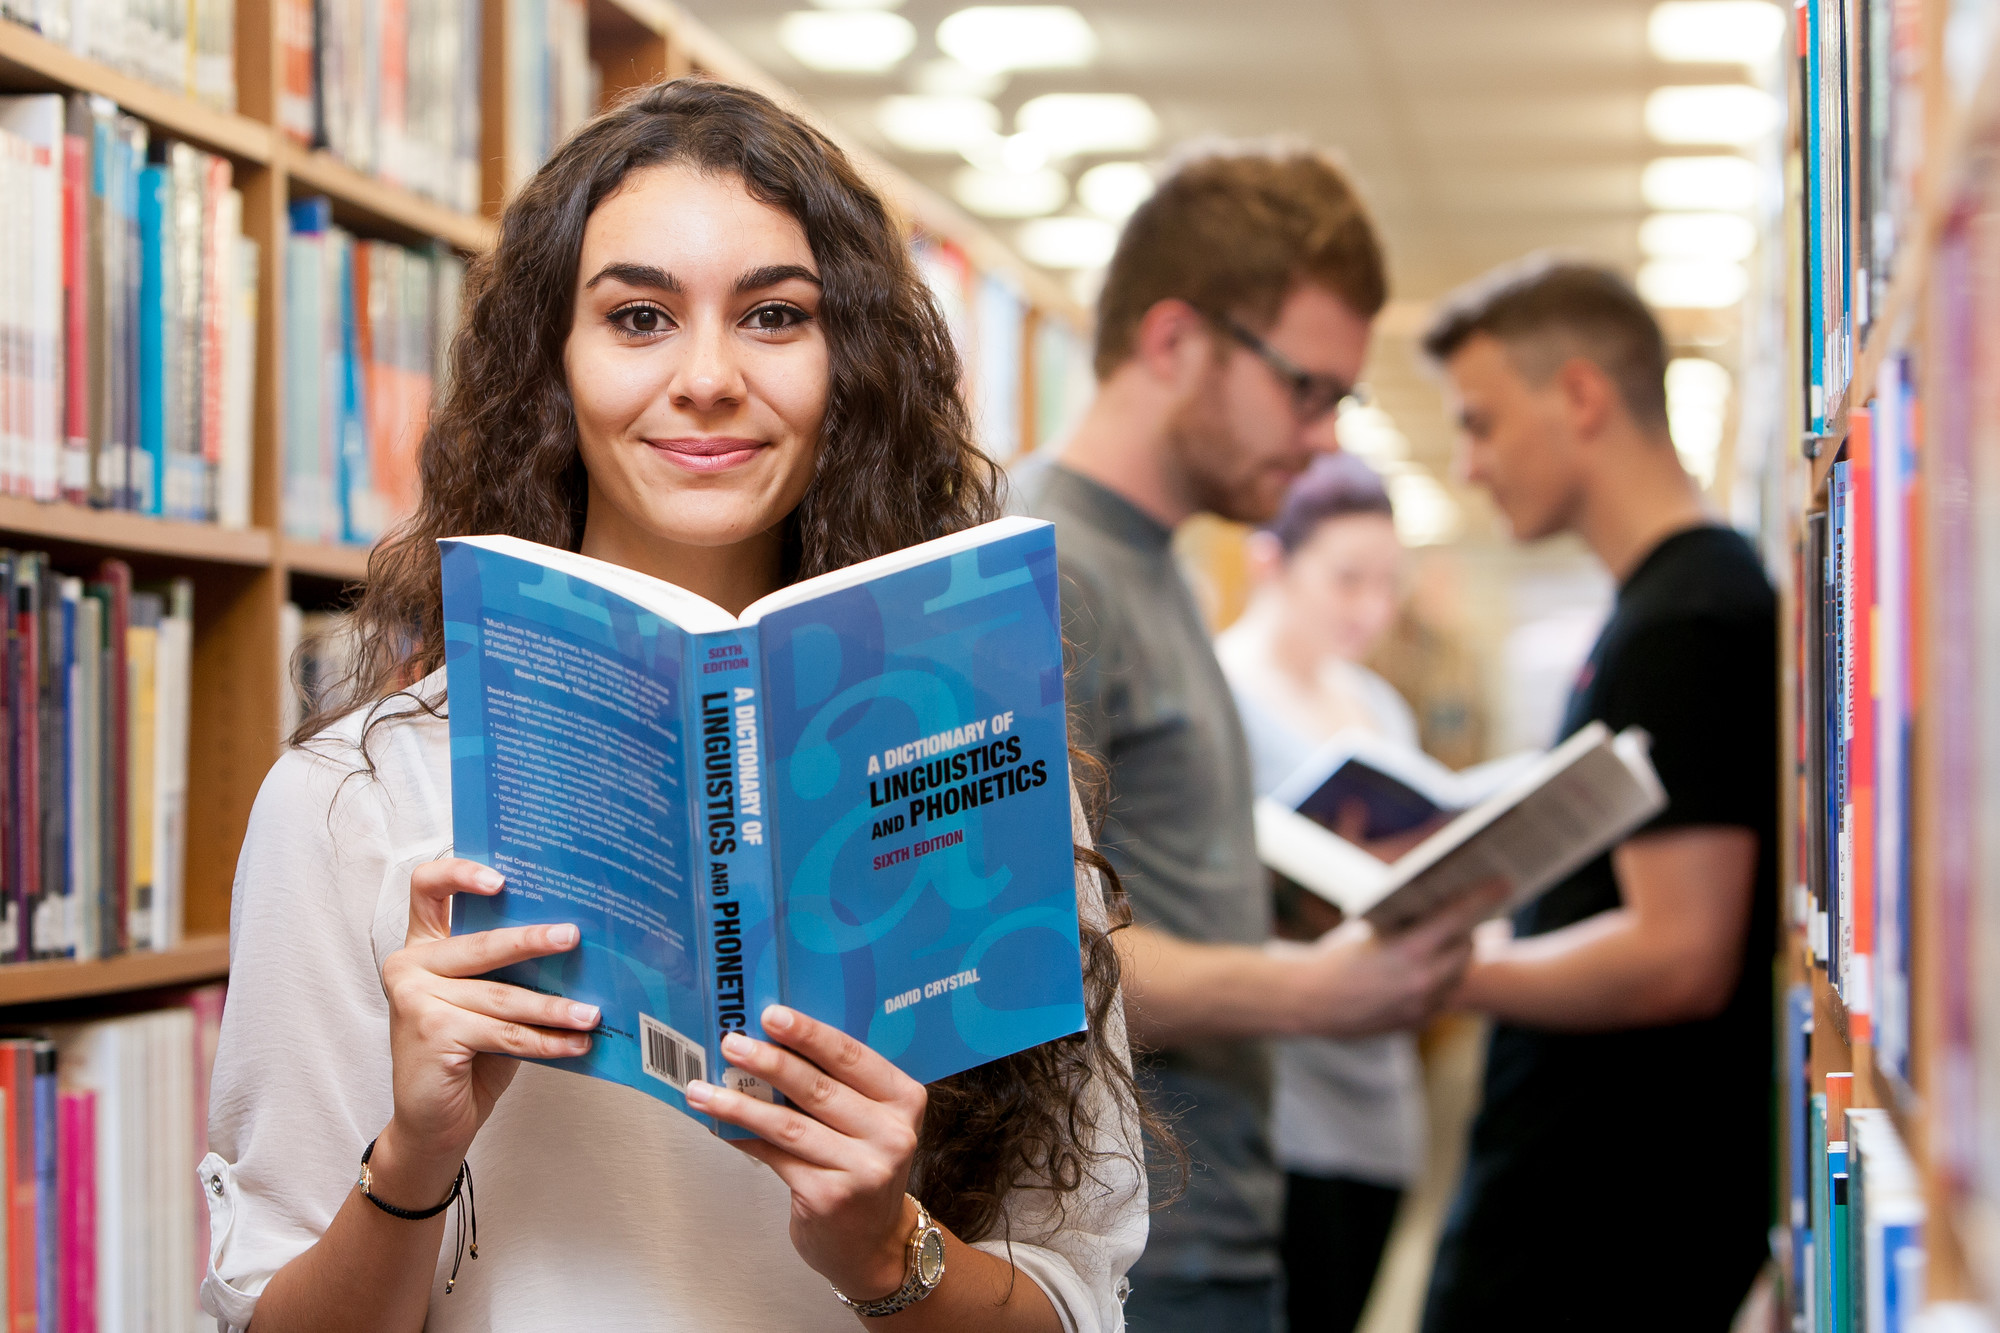 Student holding a book on linguistics and phonetics in Seaborne Library